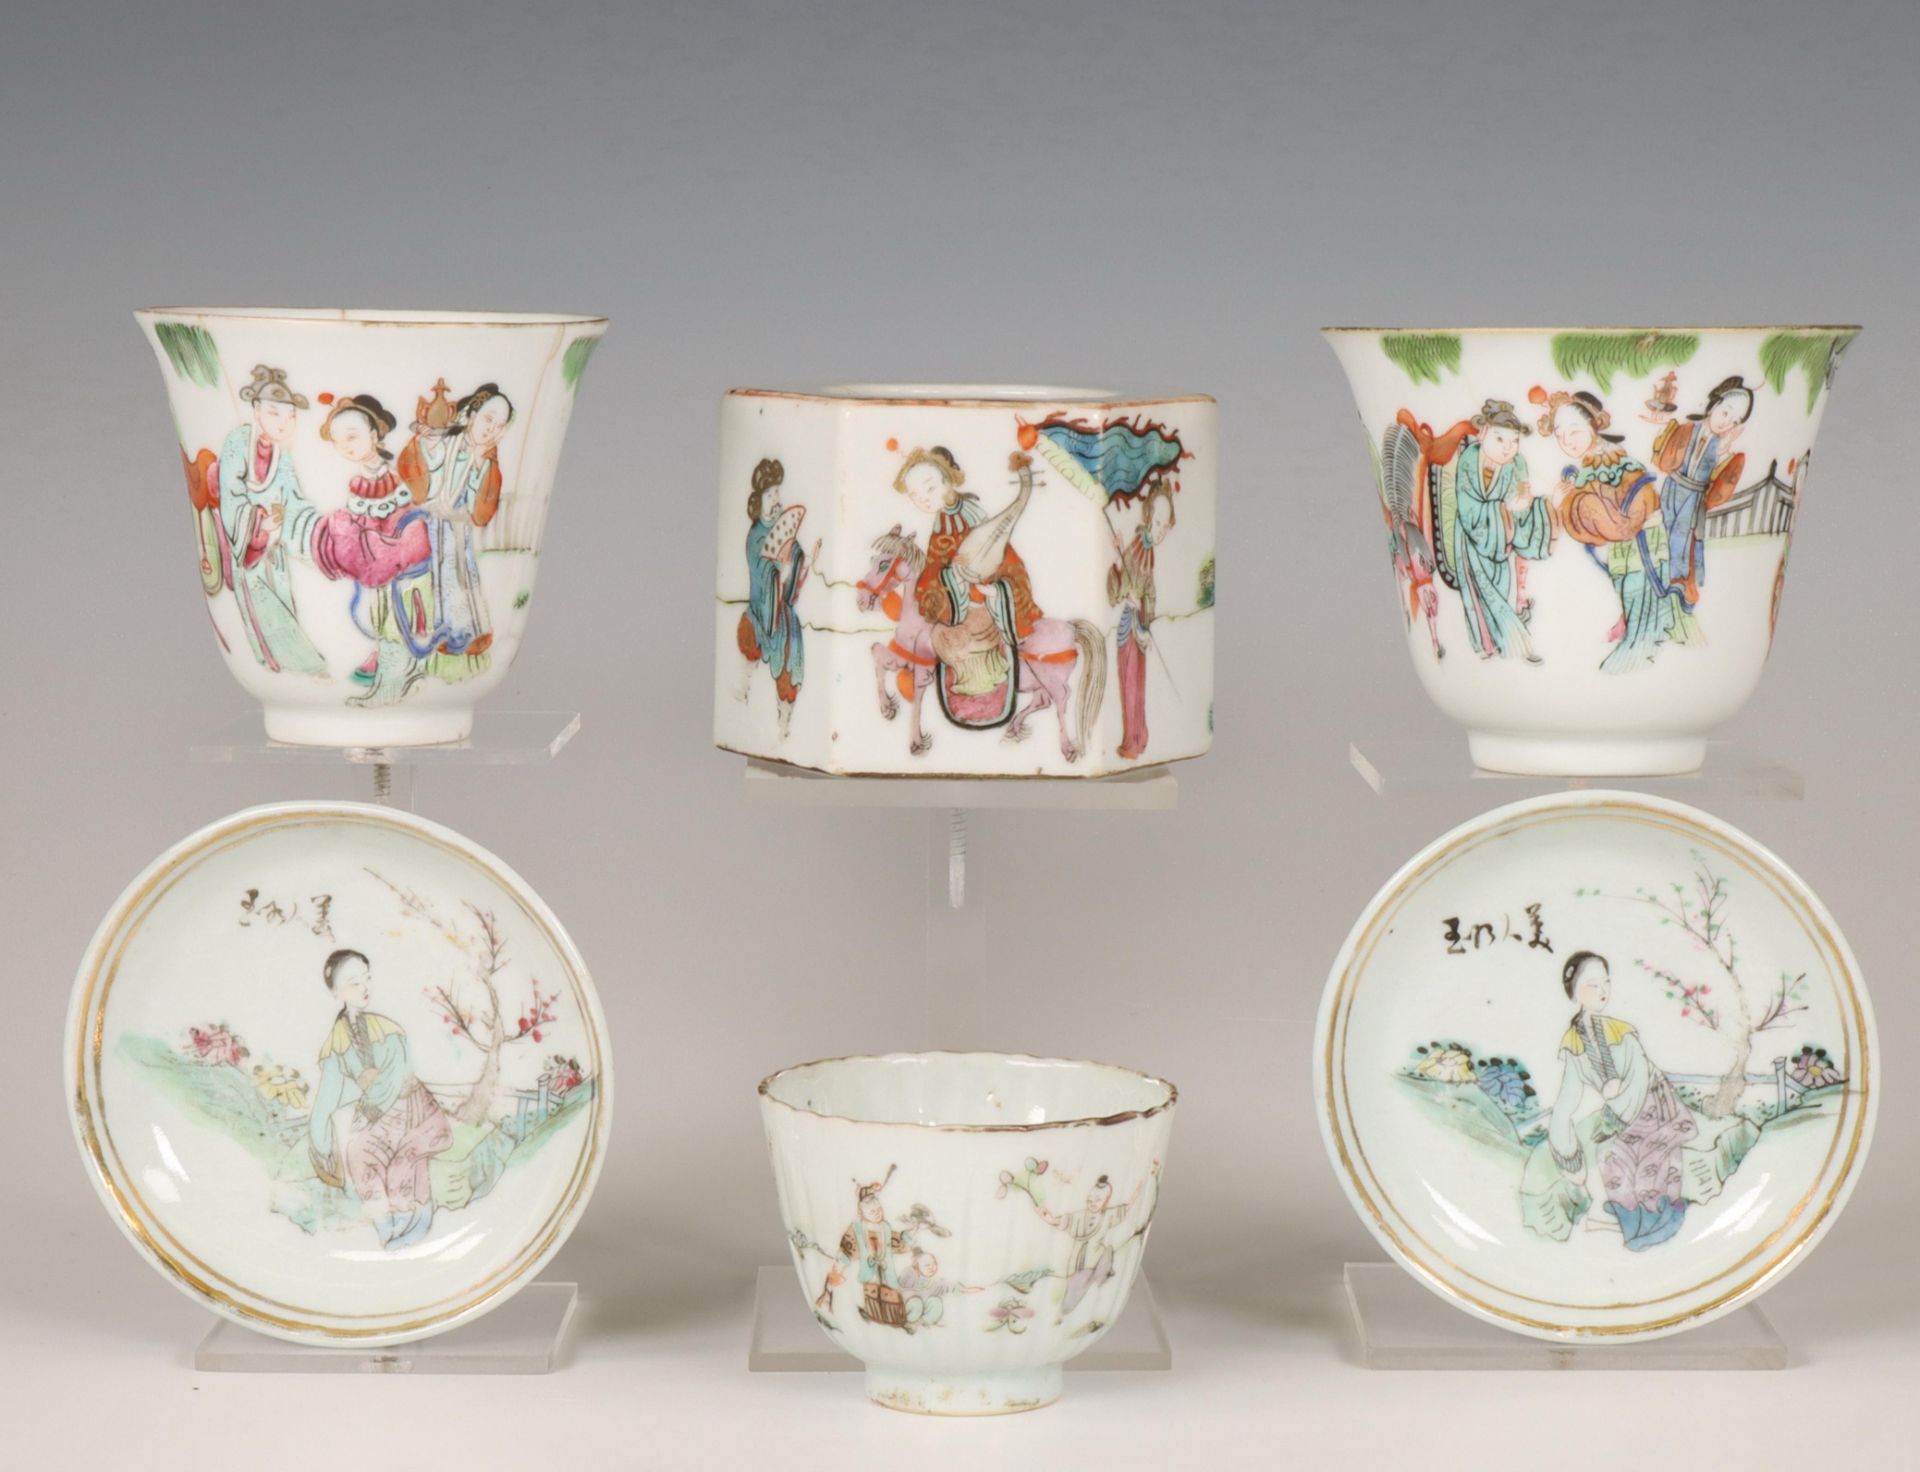 China, collection of famille rose 'figural' porcelain, 19th-20th century,